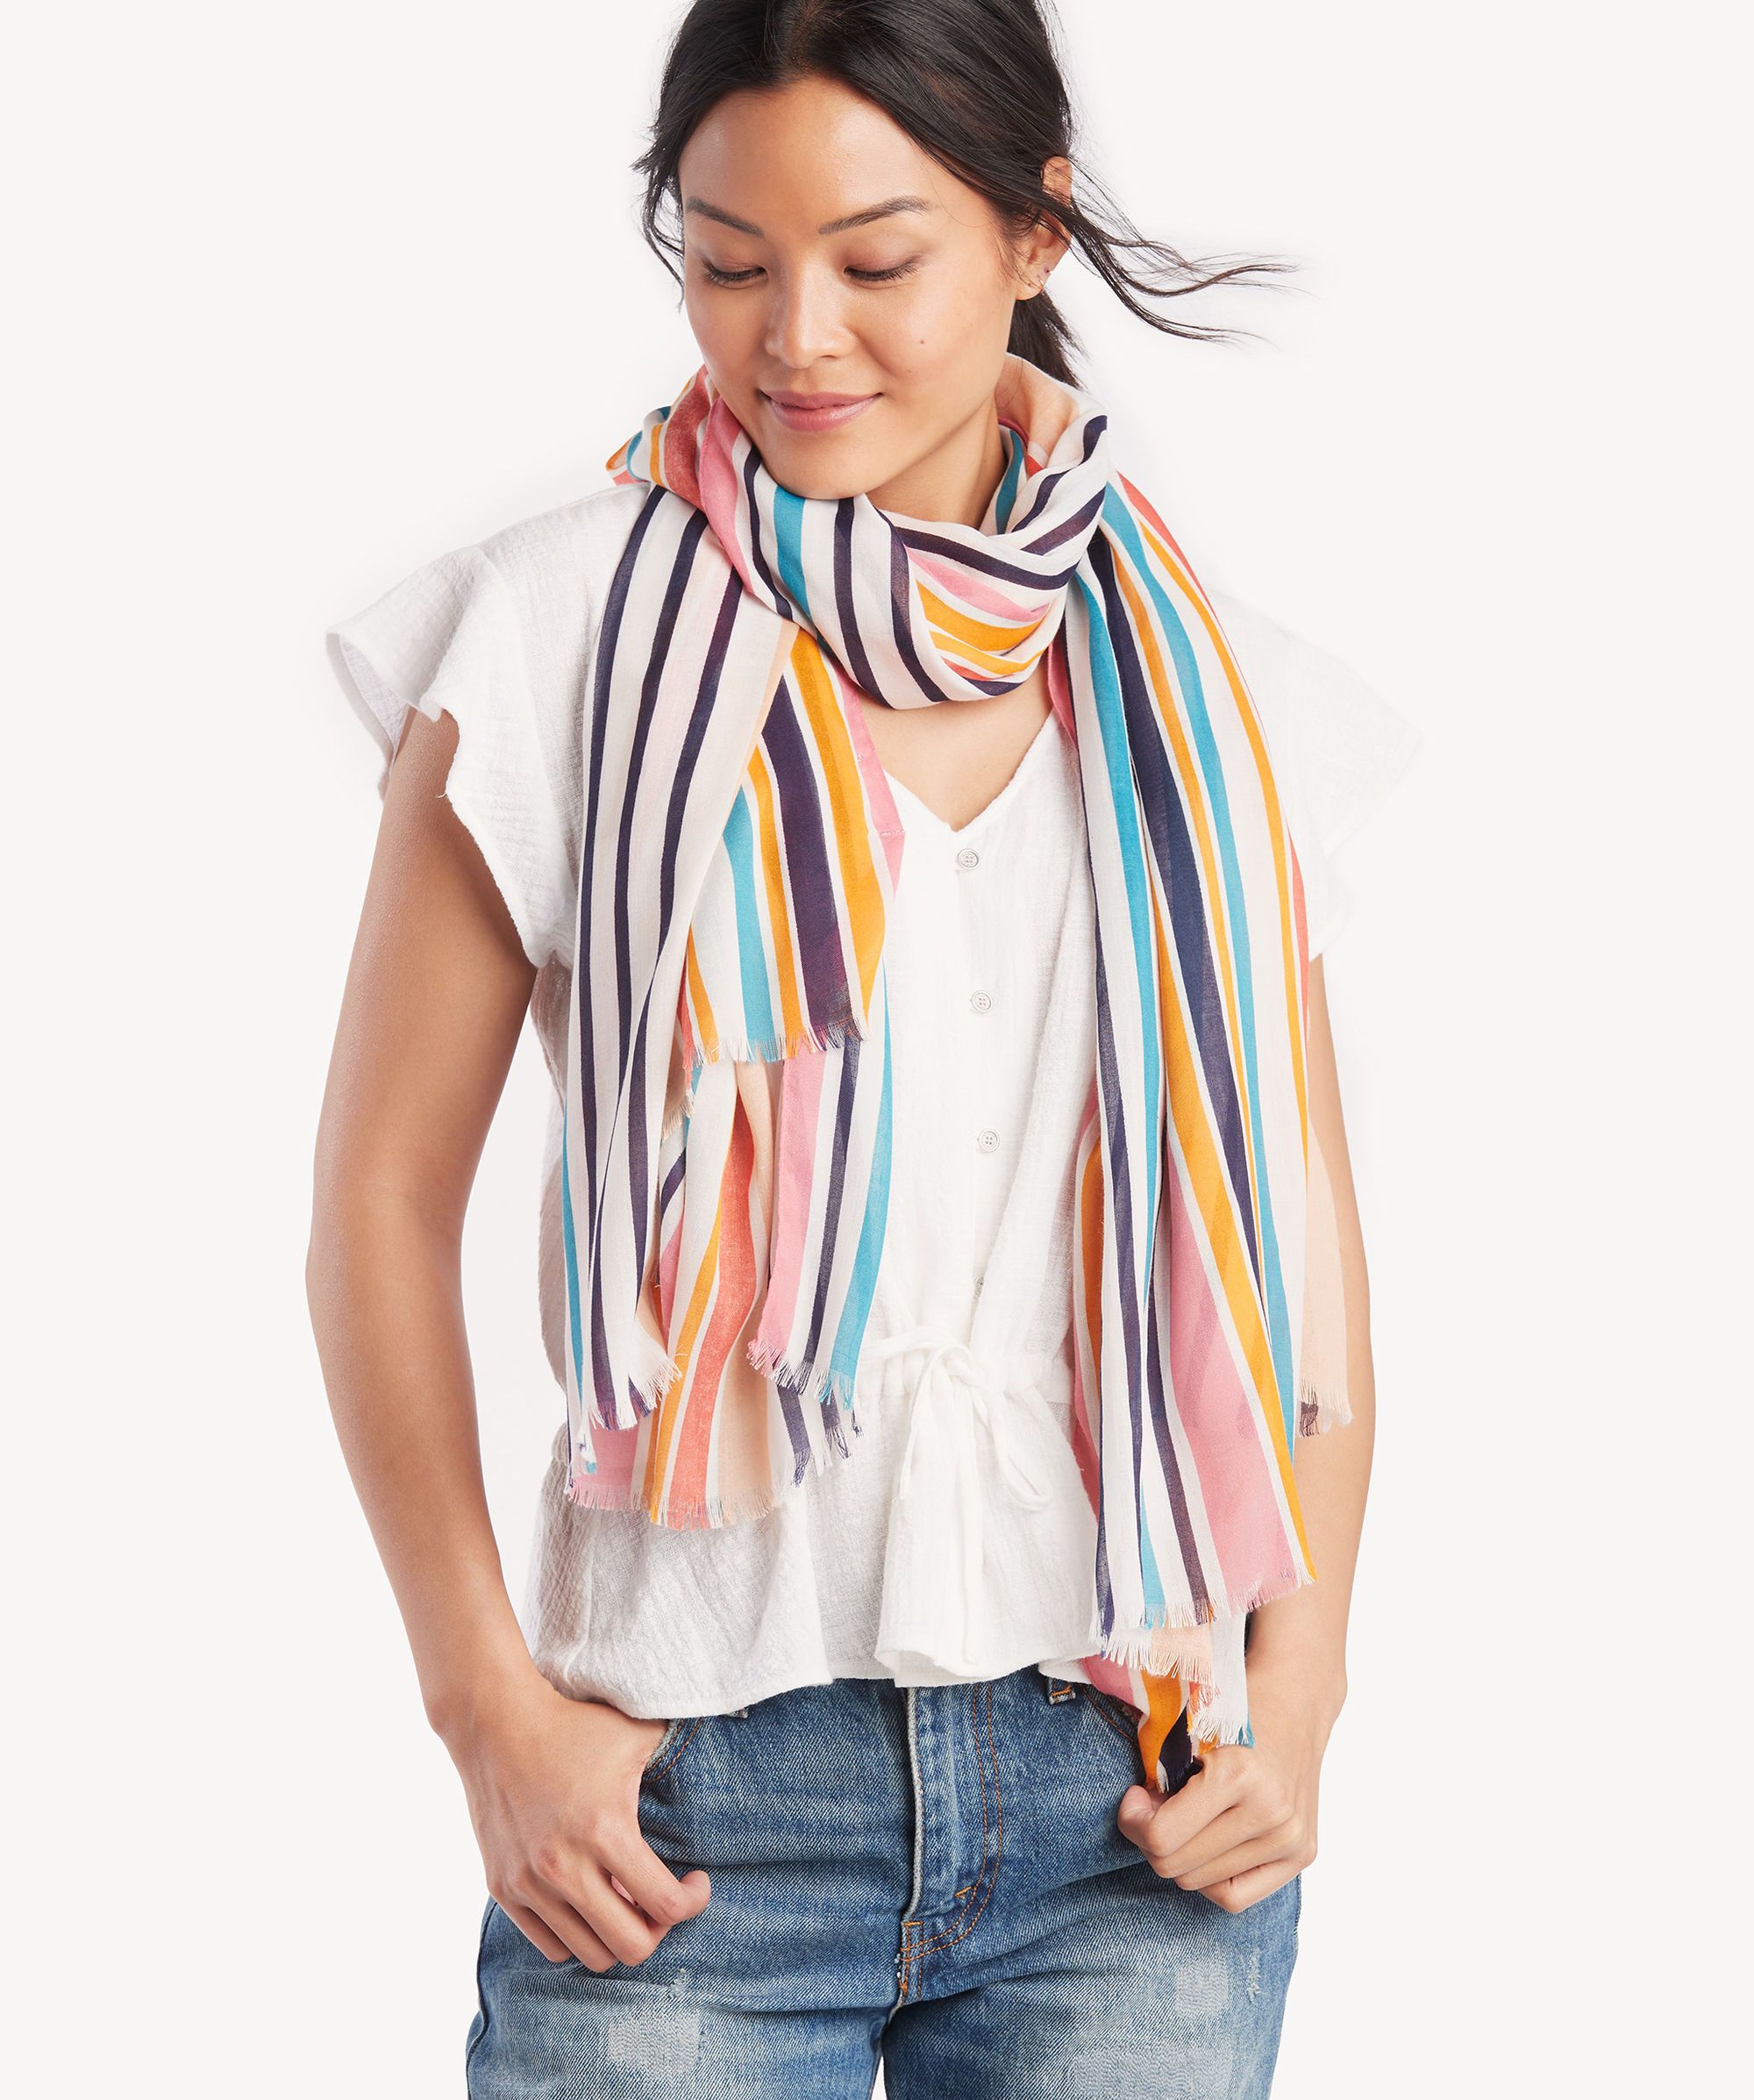 Accessories Scarves Summer Scarfs Selected Summer Scarf striped pattern casual look 